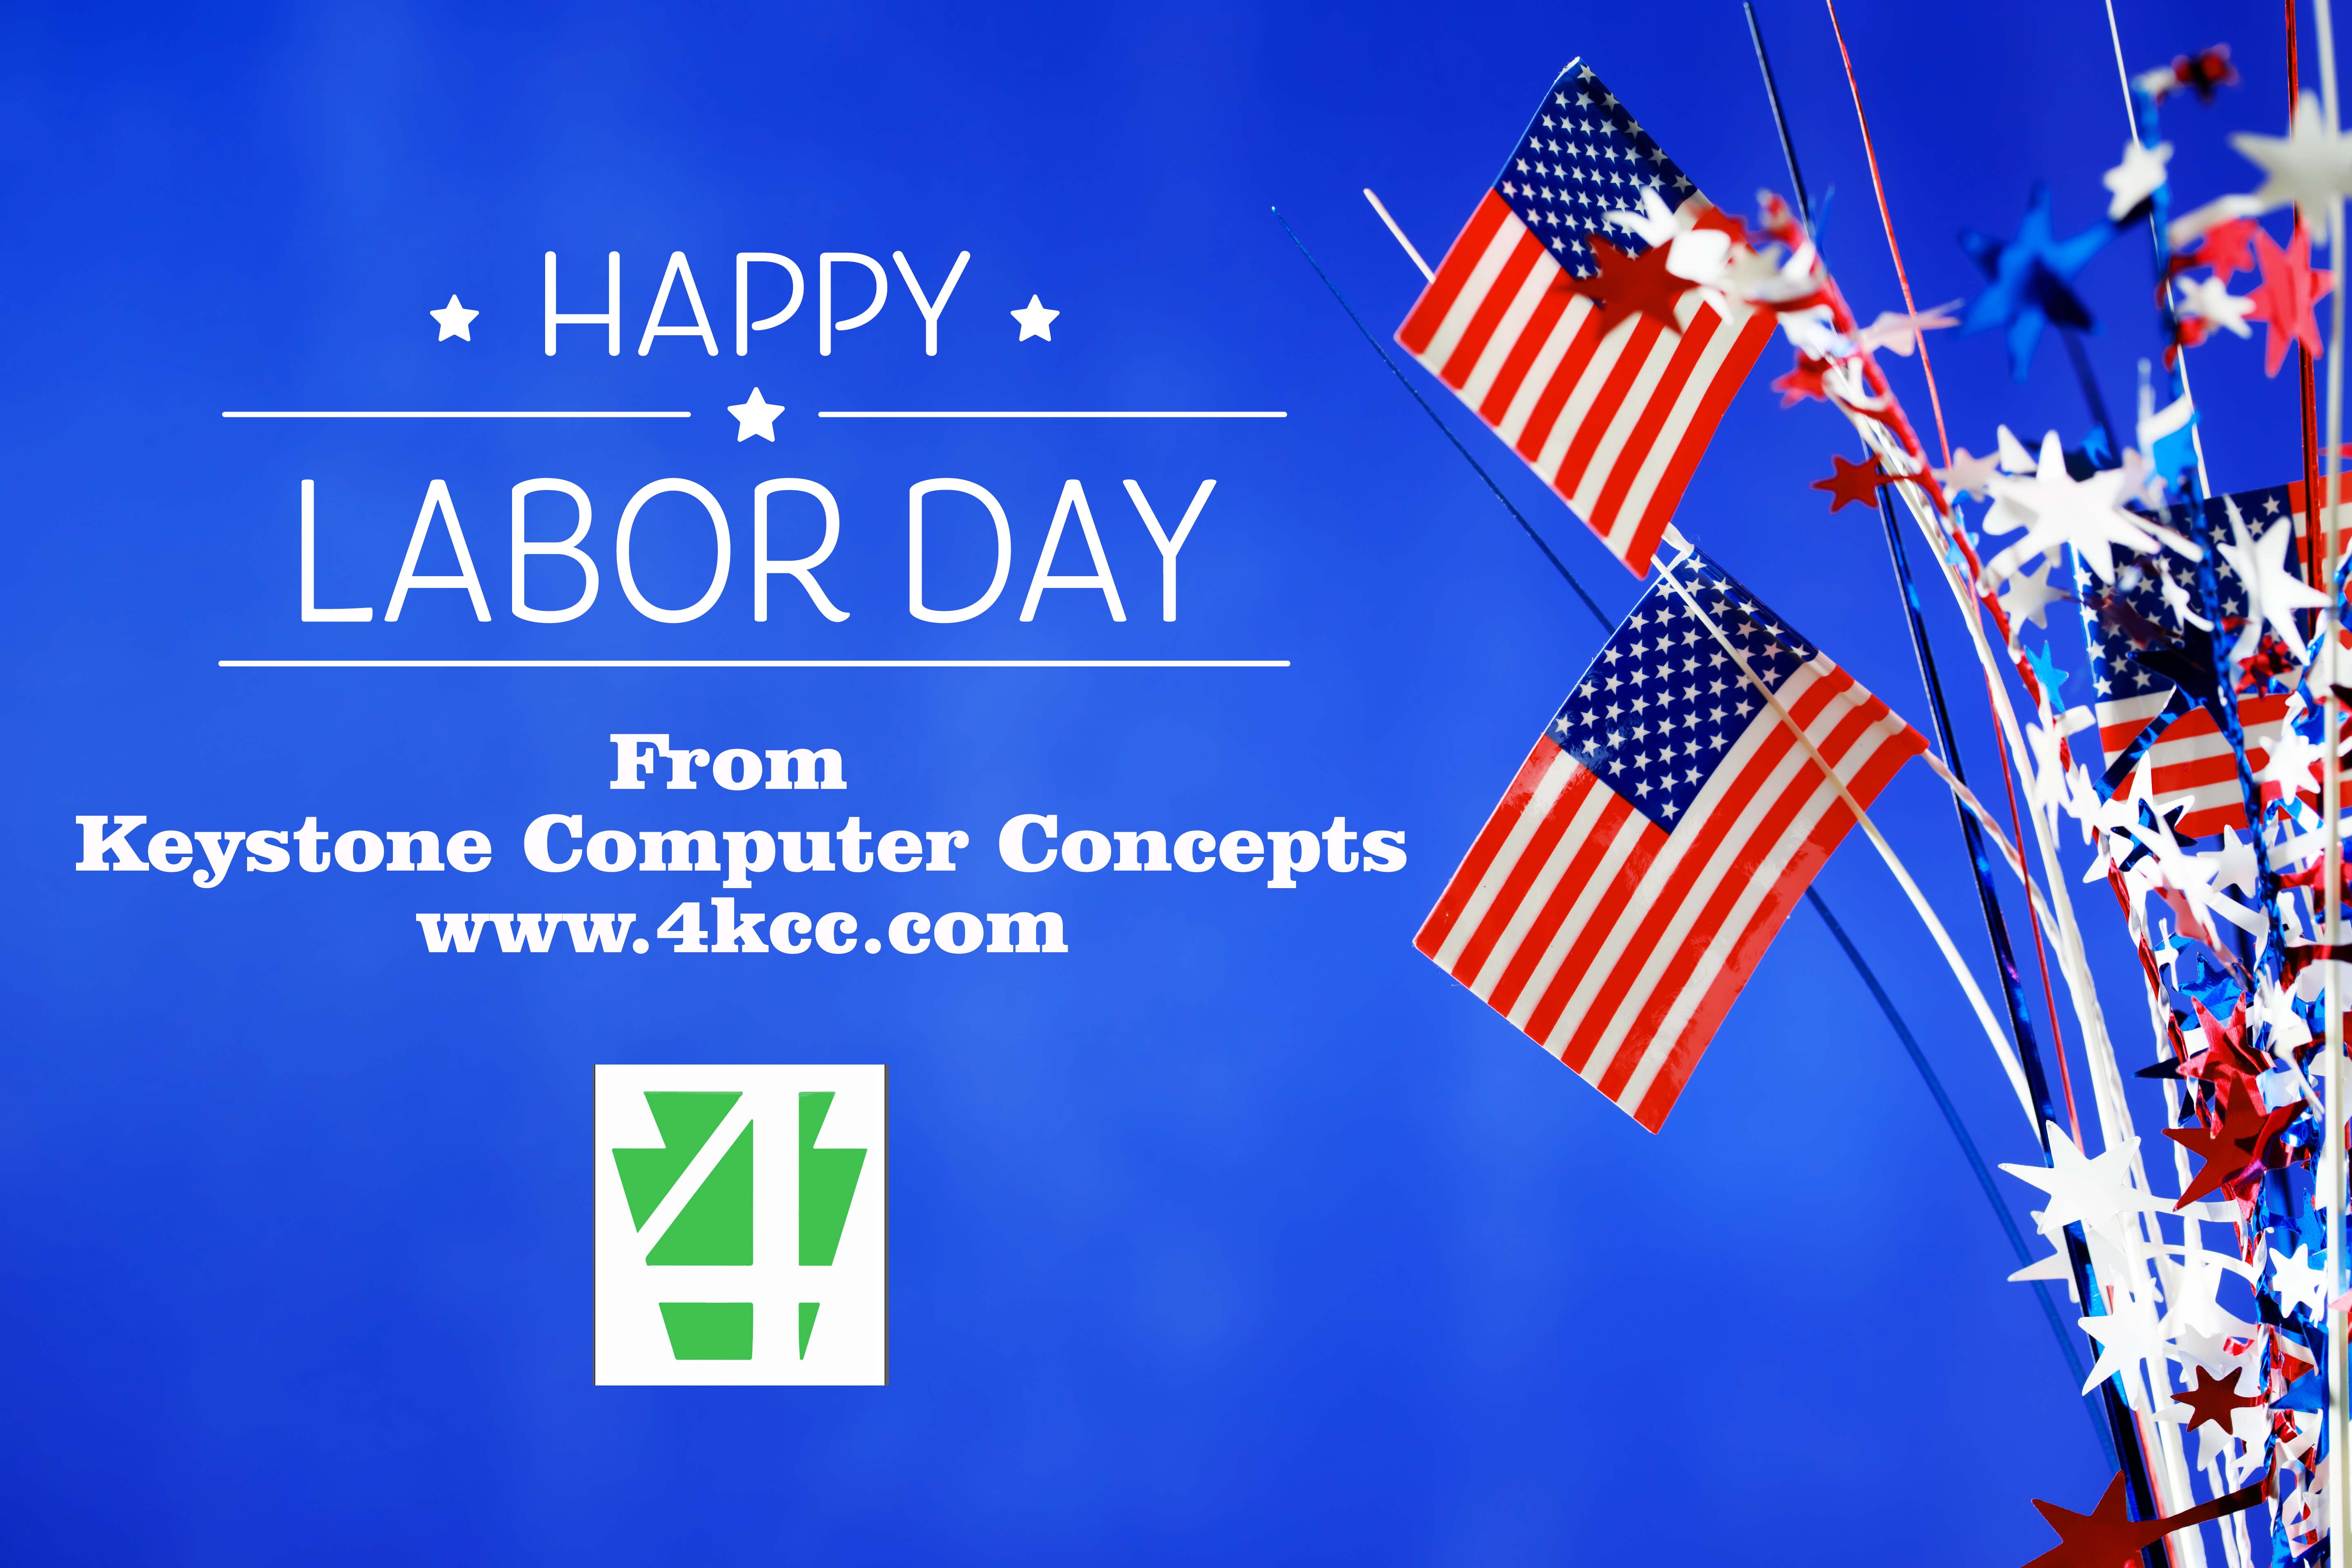 Happy Labor Day from 4KCC